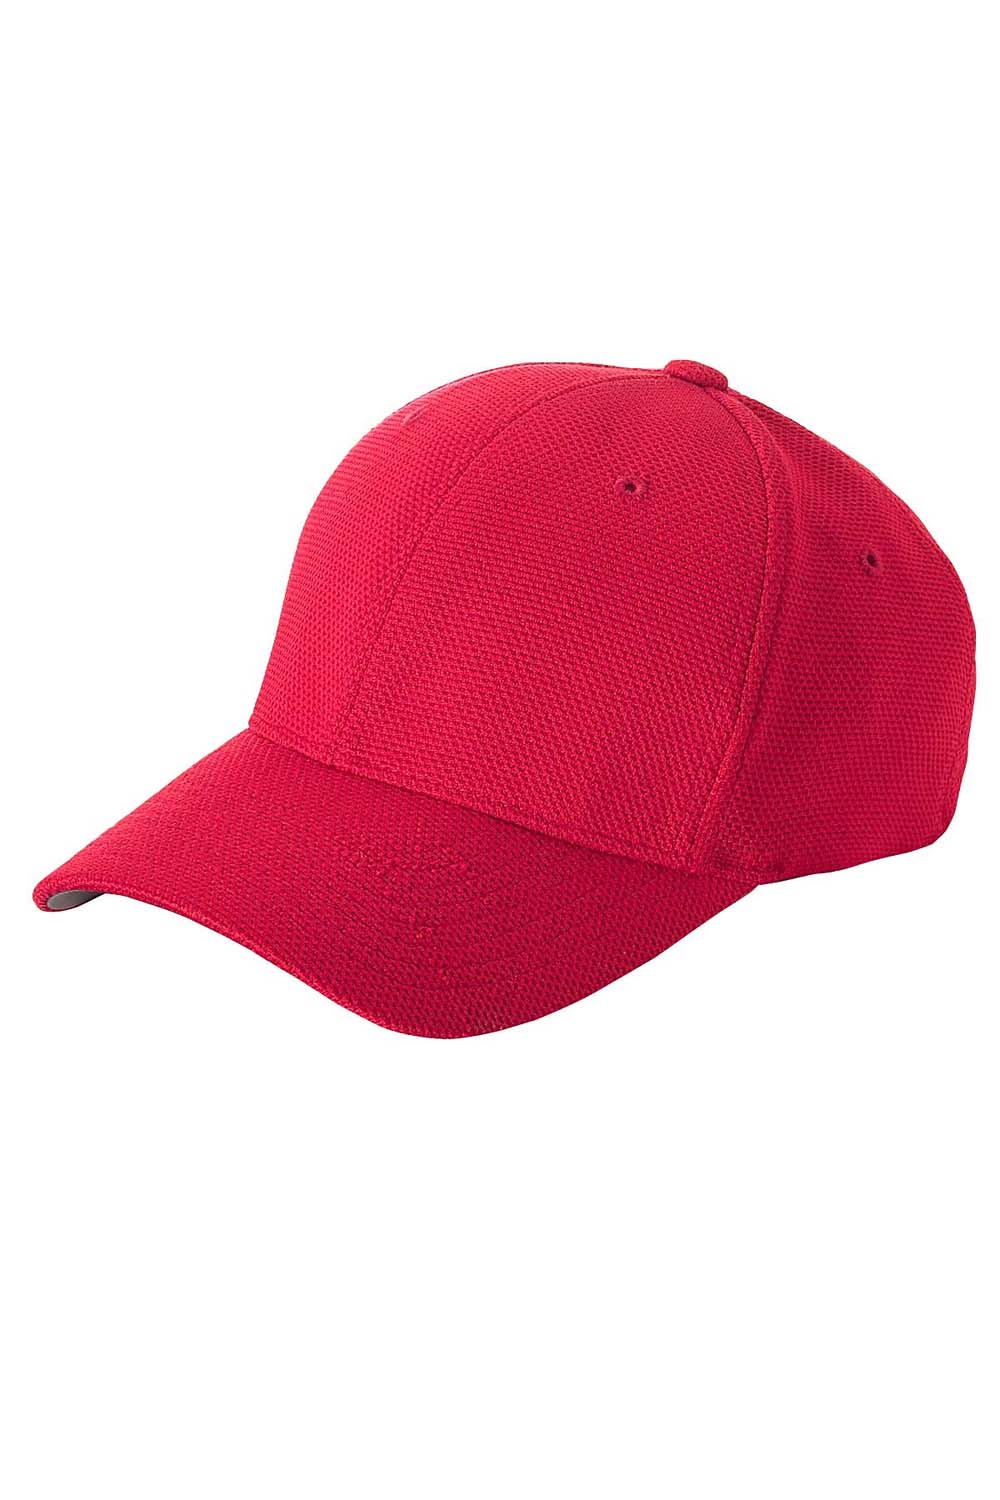 Flexfit 6577CD Mens Cool & Dry Moisture Wicking Stretch Fit Hat Red Front